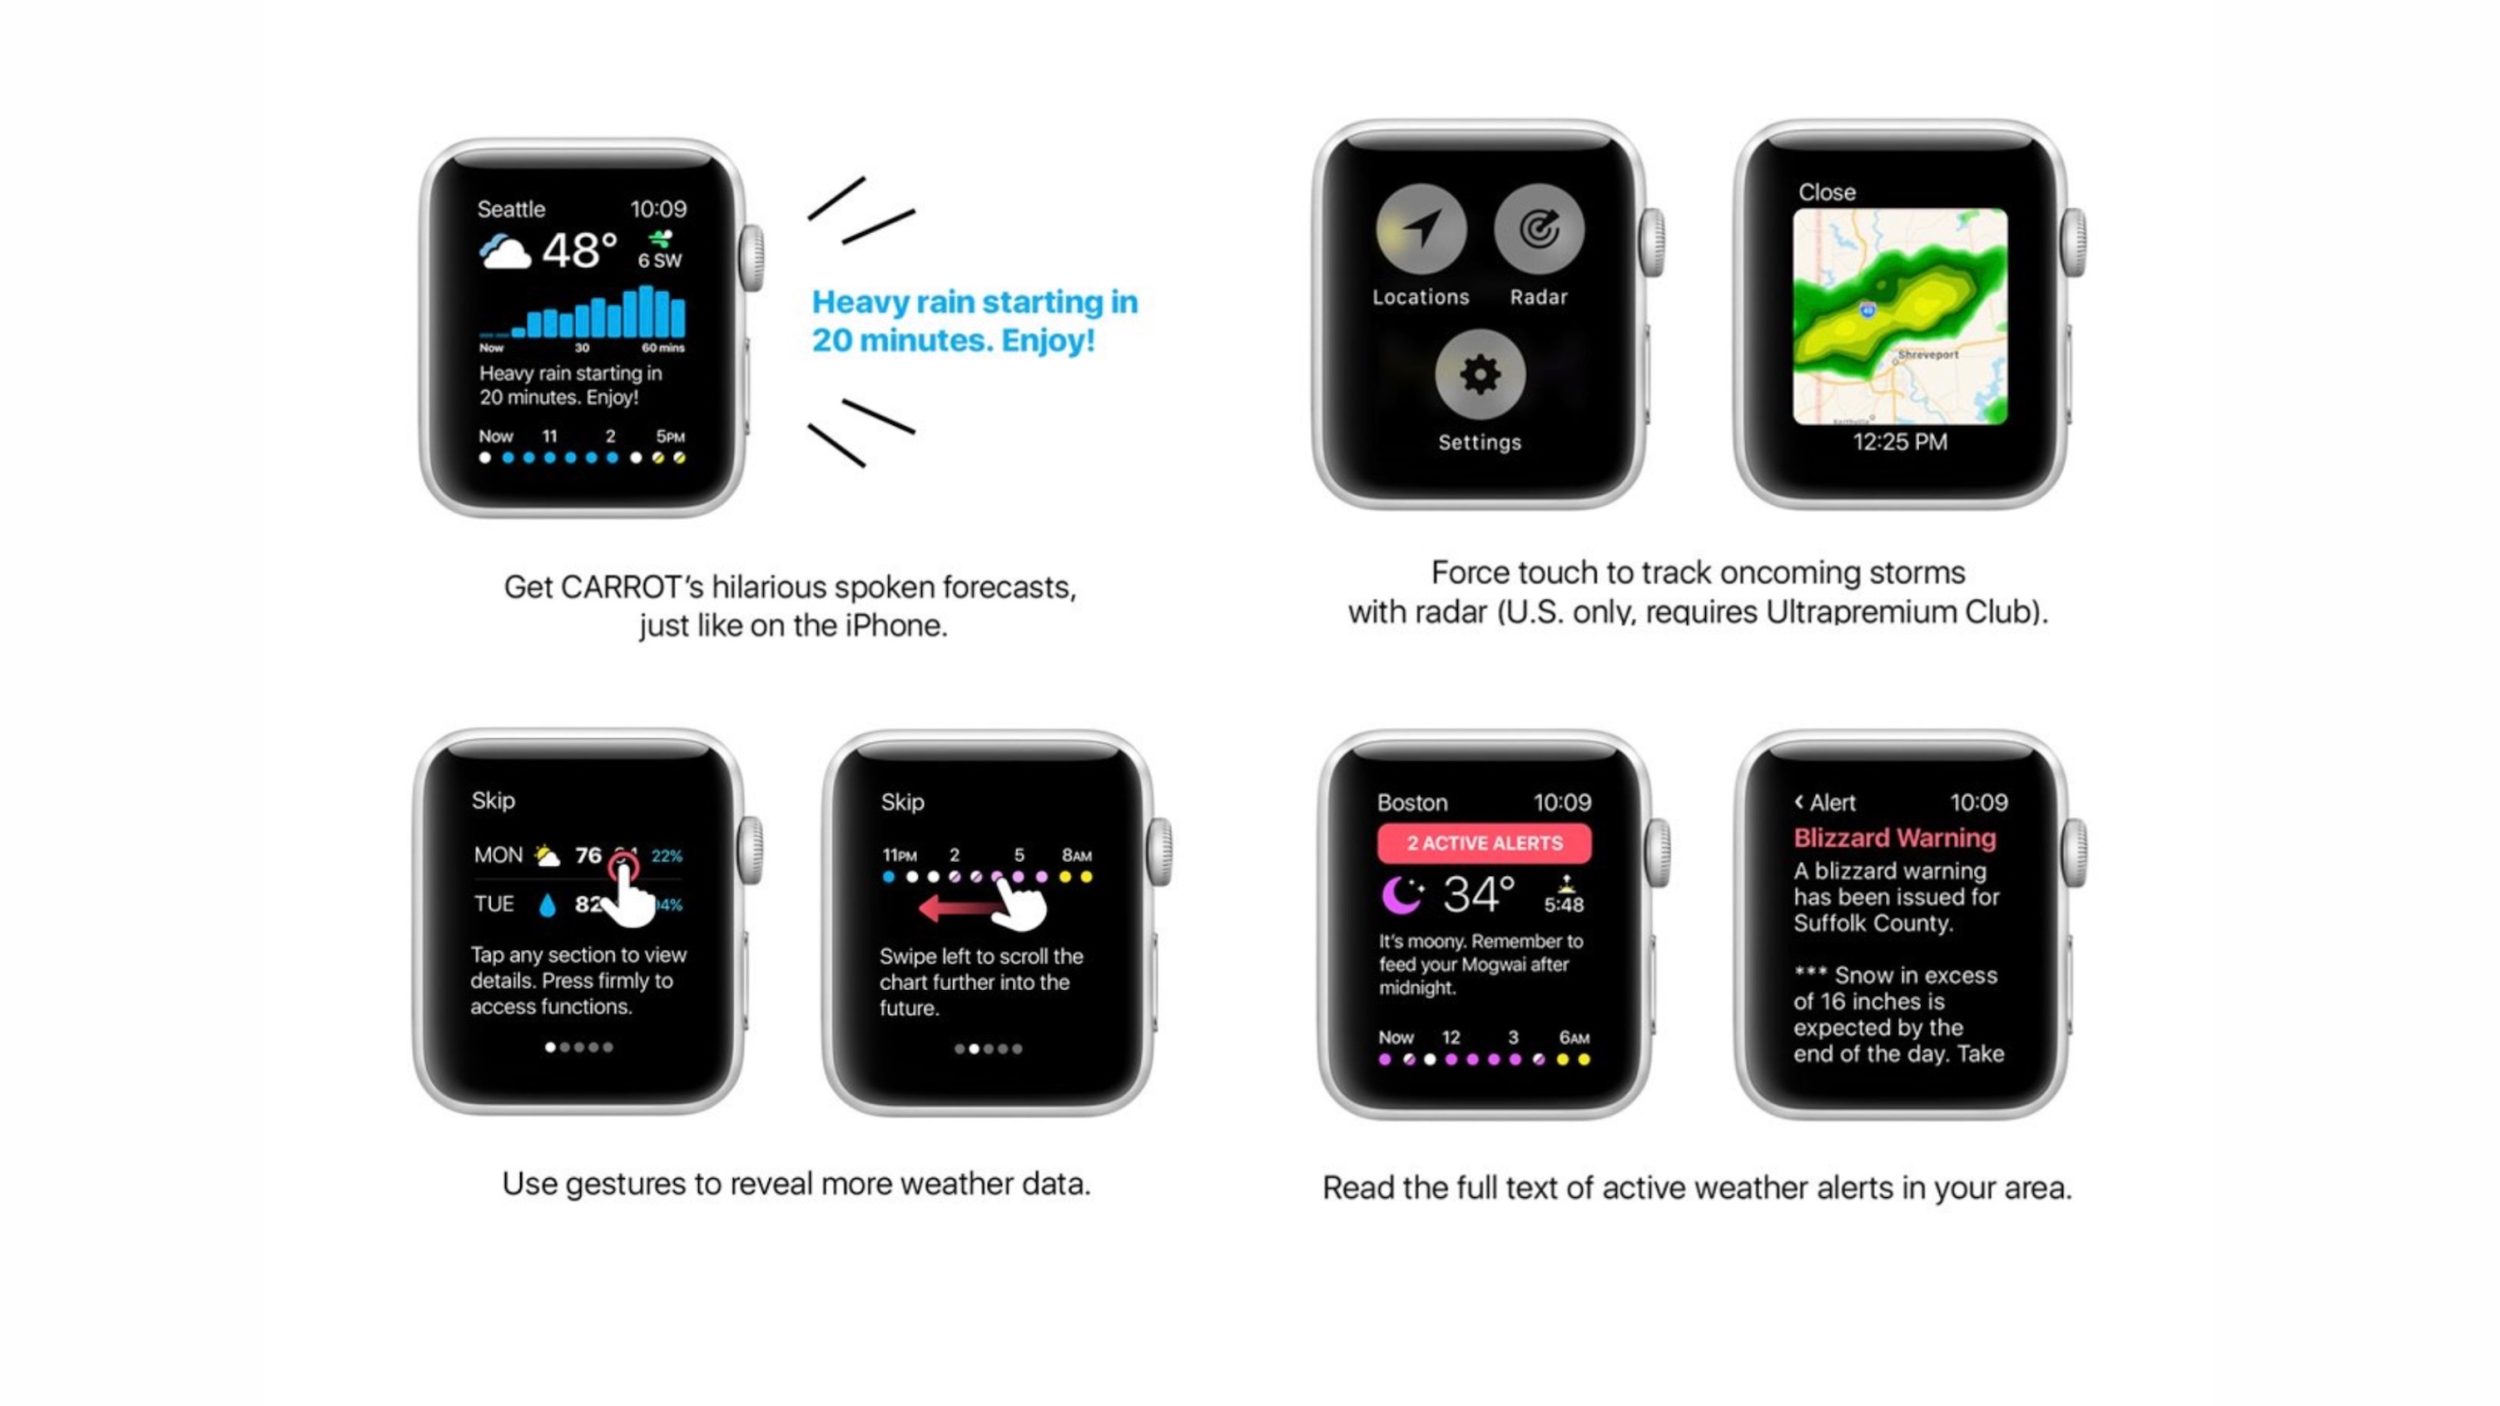 CARROT Weather App Update Brings All New UI, Customization, Speech, and More to Apple Watch